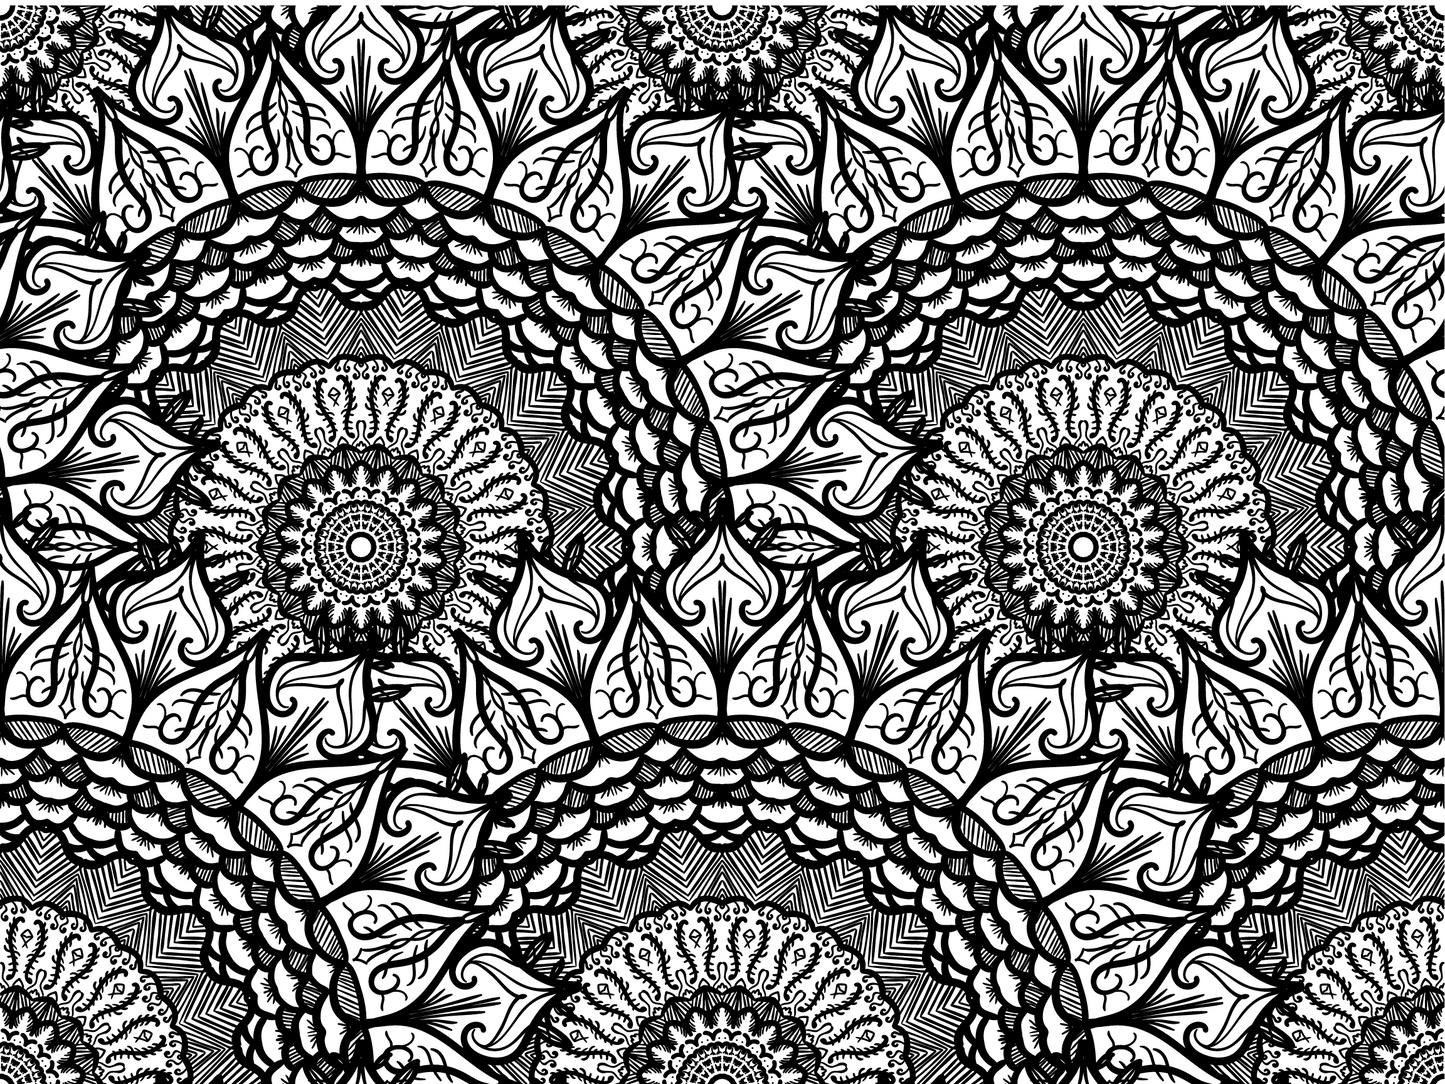 Sunflower Mandala Giant Coloring Page - 36"x24"